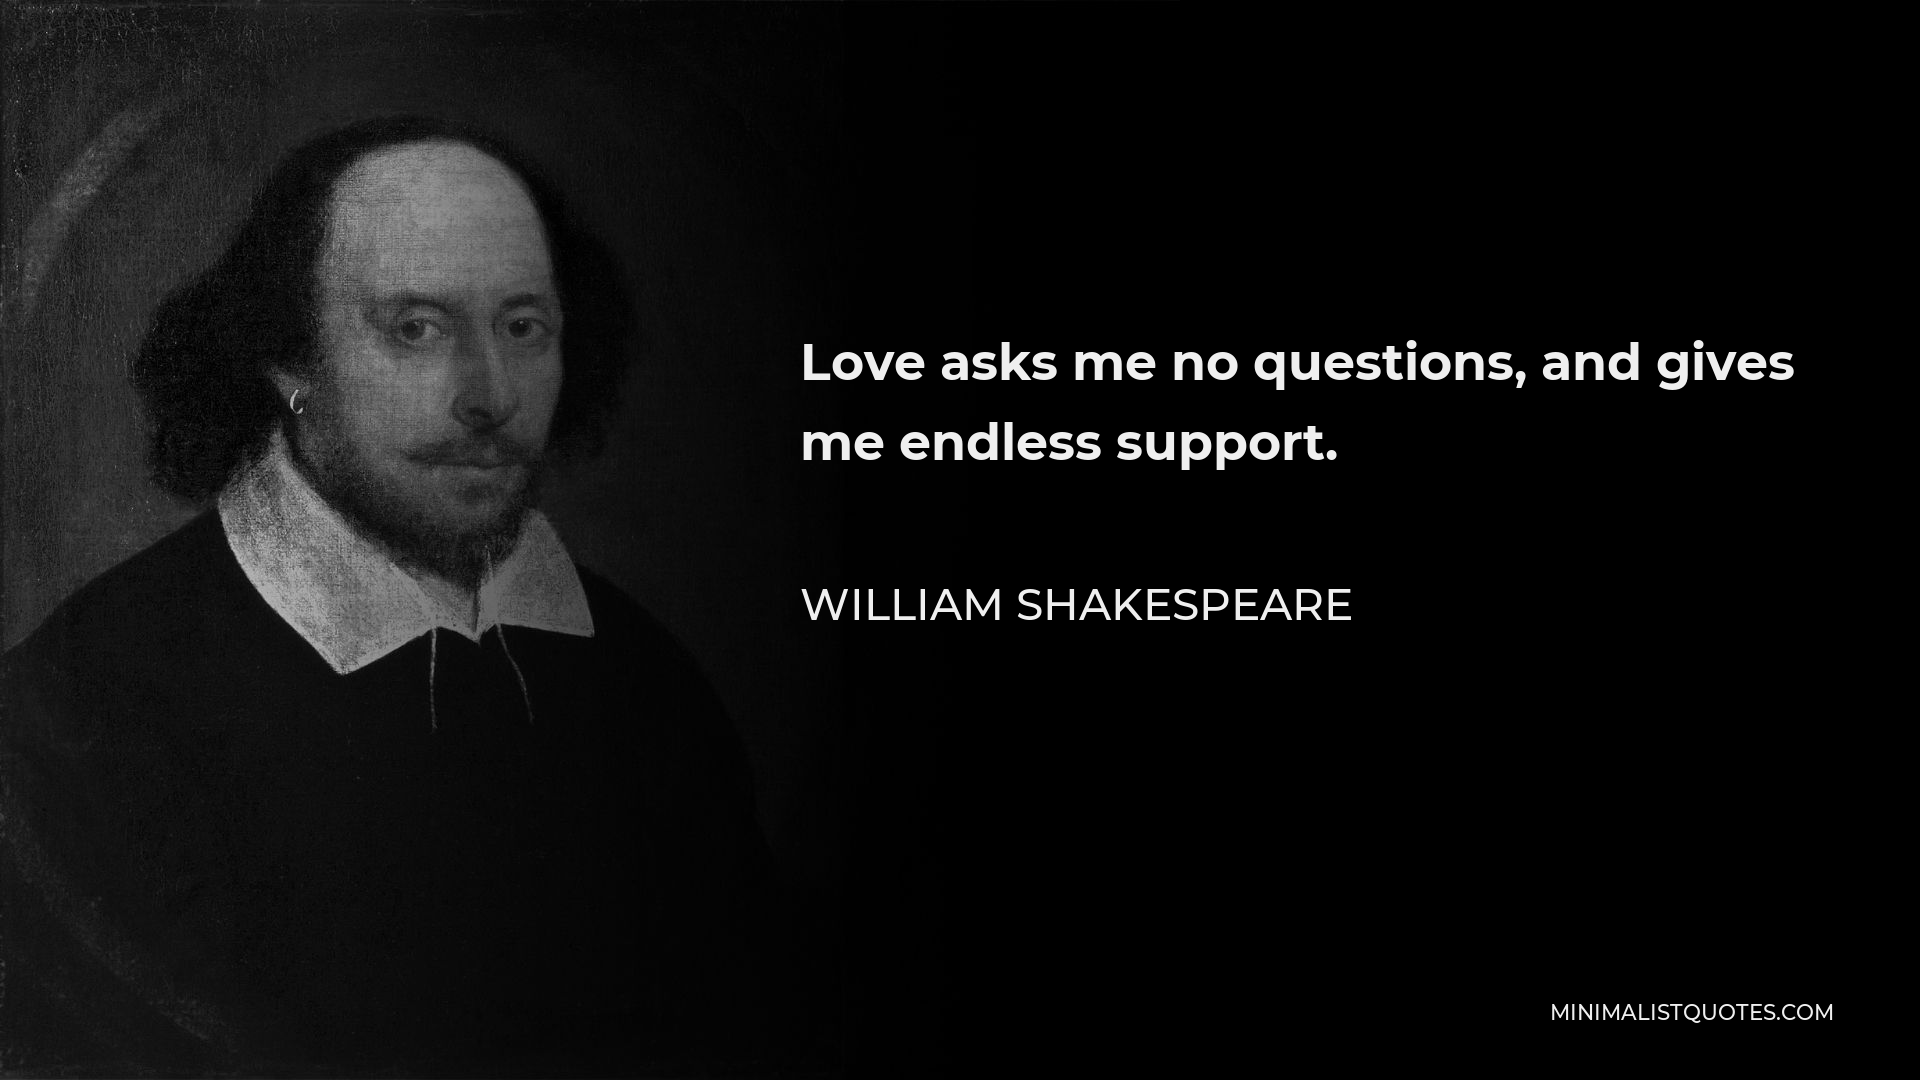 William Shakespeare Quote - Love asks me no questions, and gives me endless support.